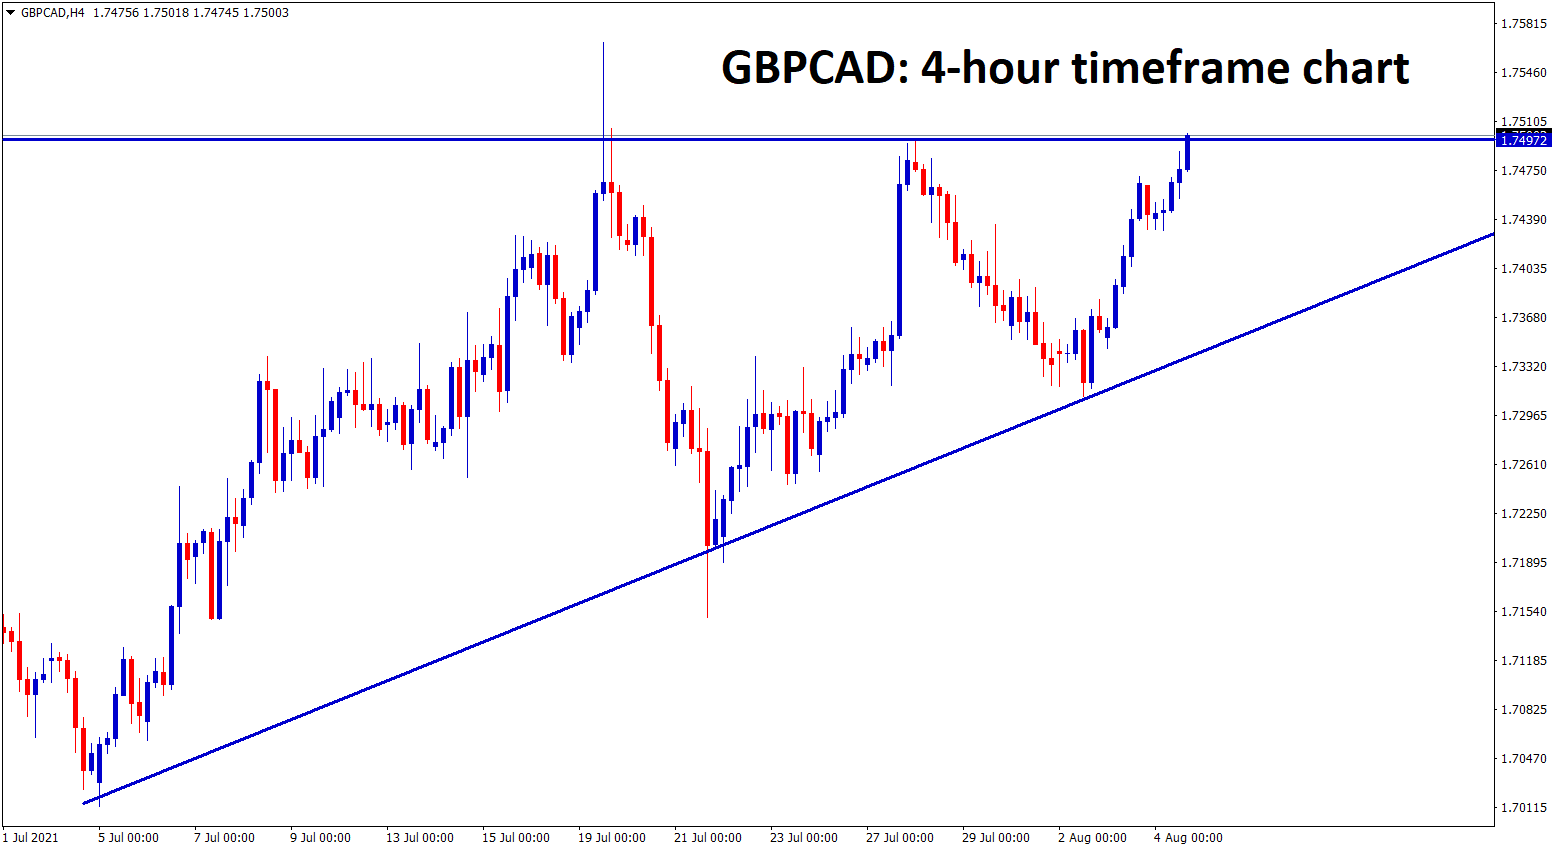 GBPCAD is now at the top level of the Ascending Triangle pattern wait for breakout from this pattern